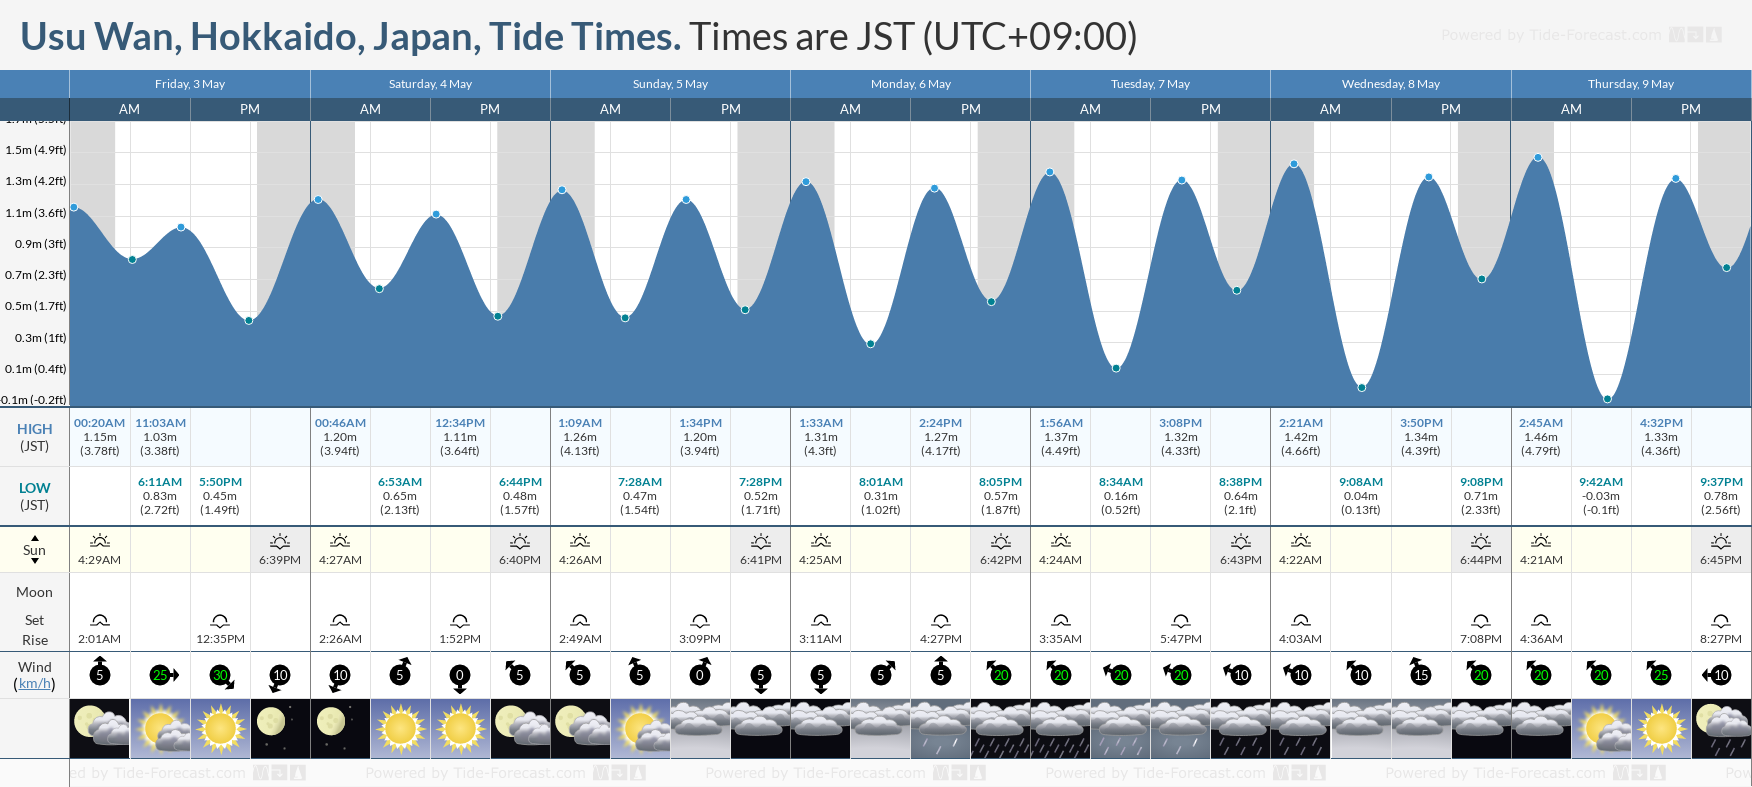 Usu Wan, Hokkaido, Japan Tide Chart including high and low tide tide times for the next 7 days